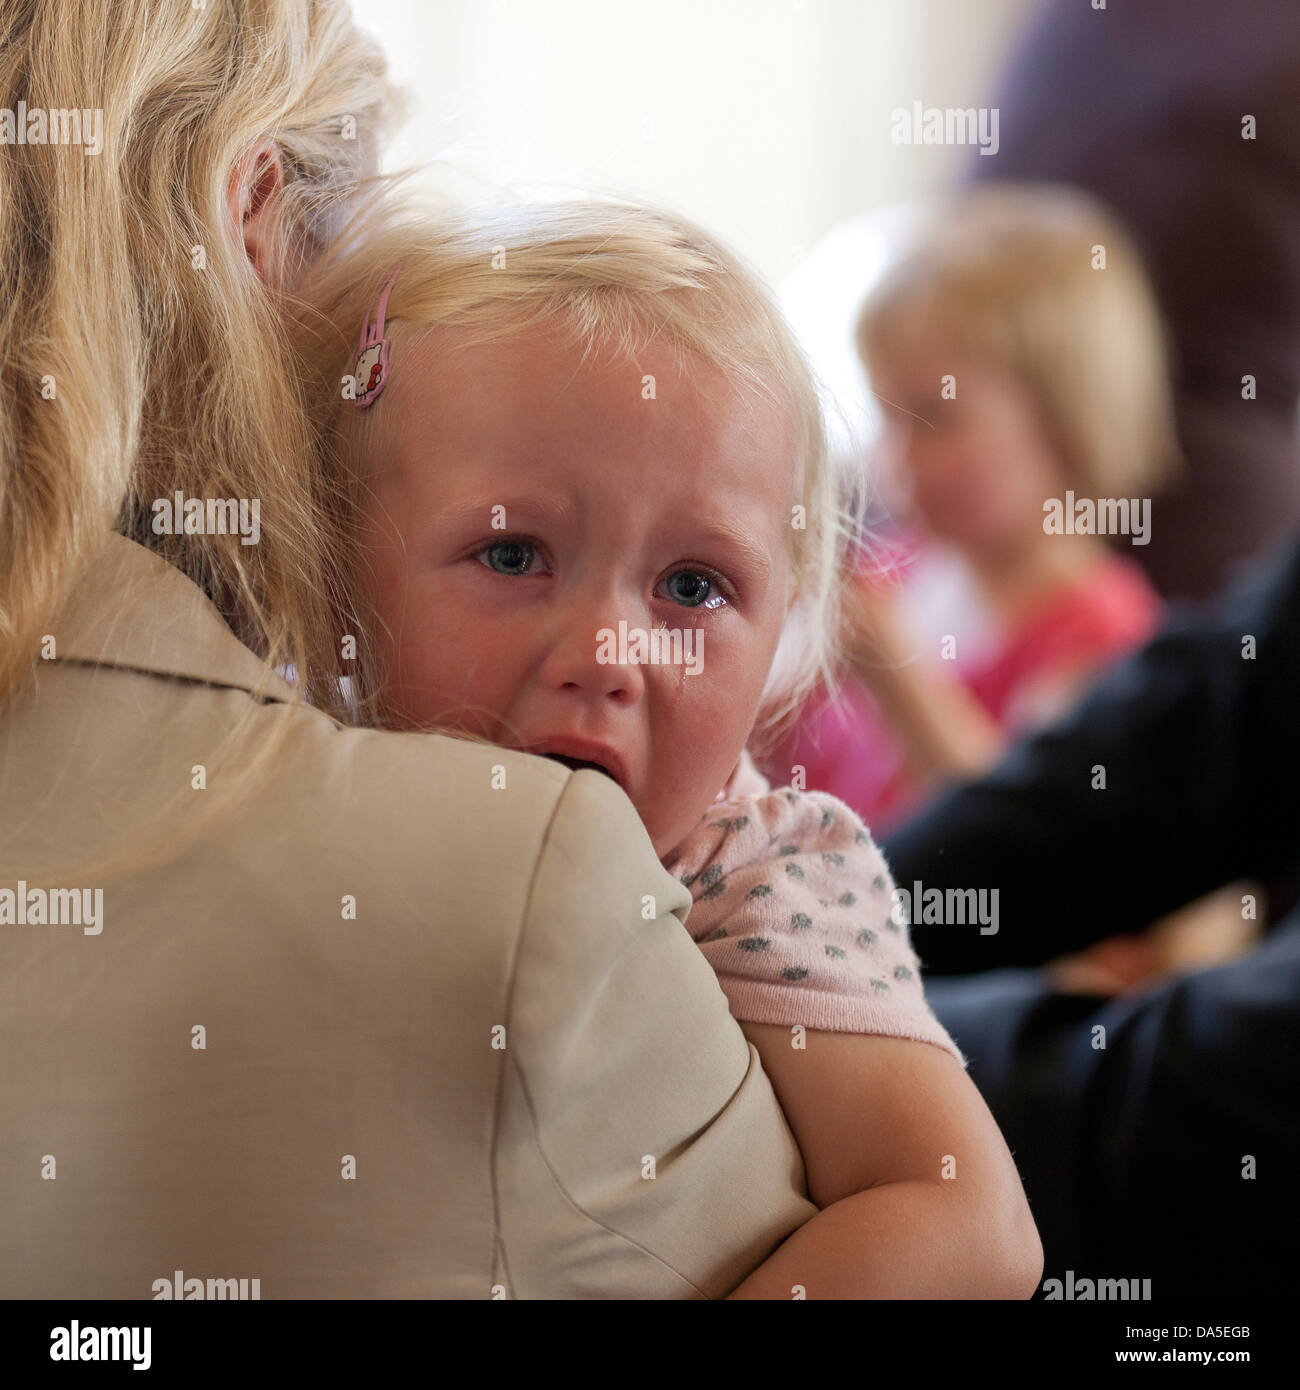 Mother comforting young child Stock Photo